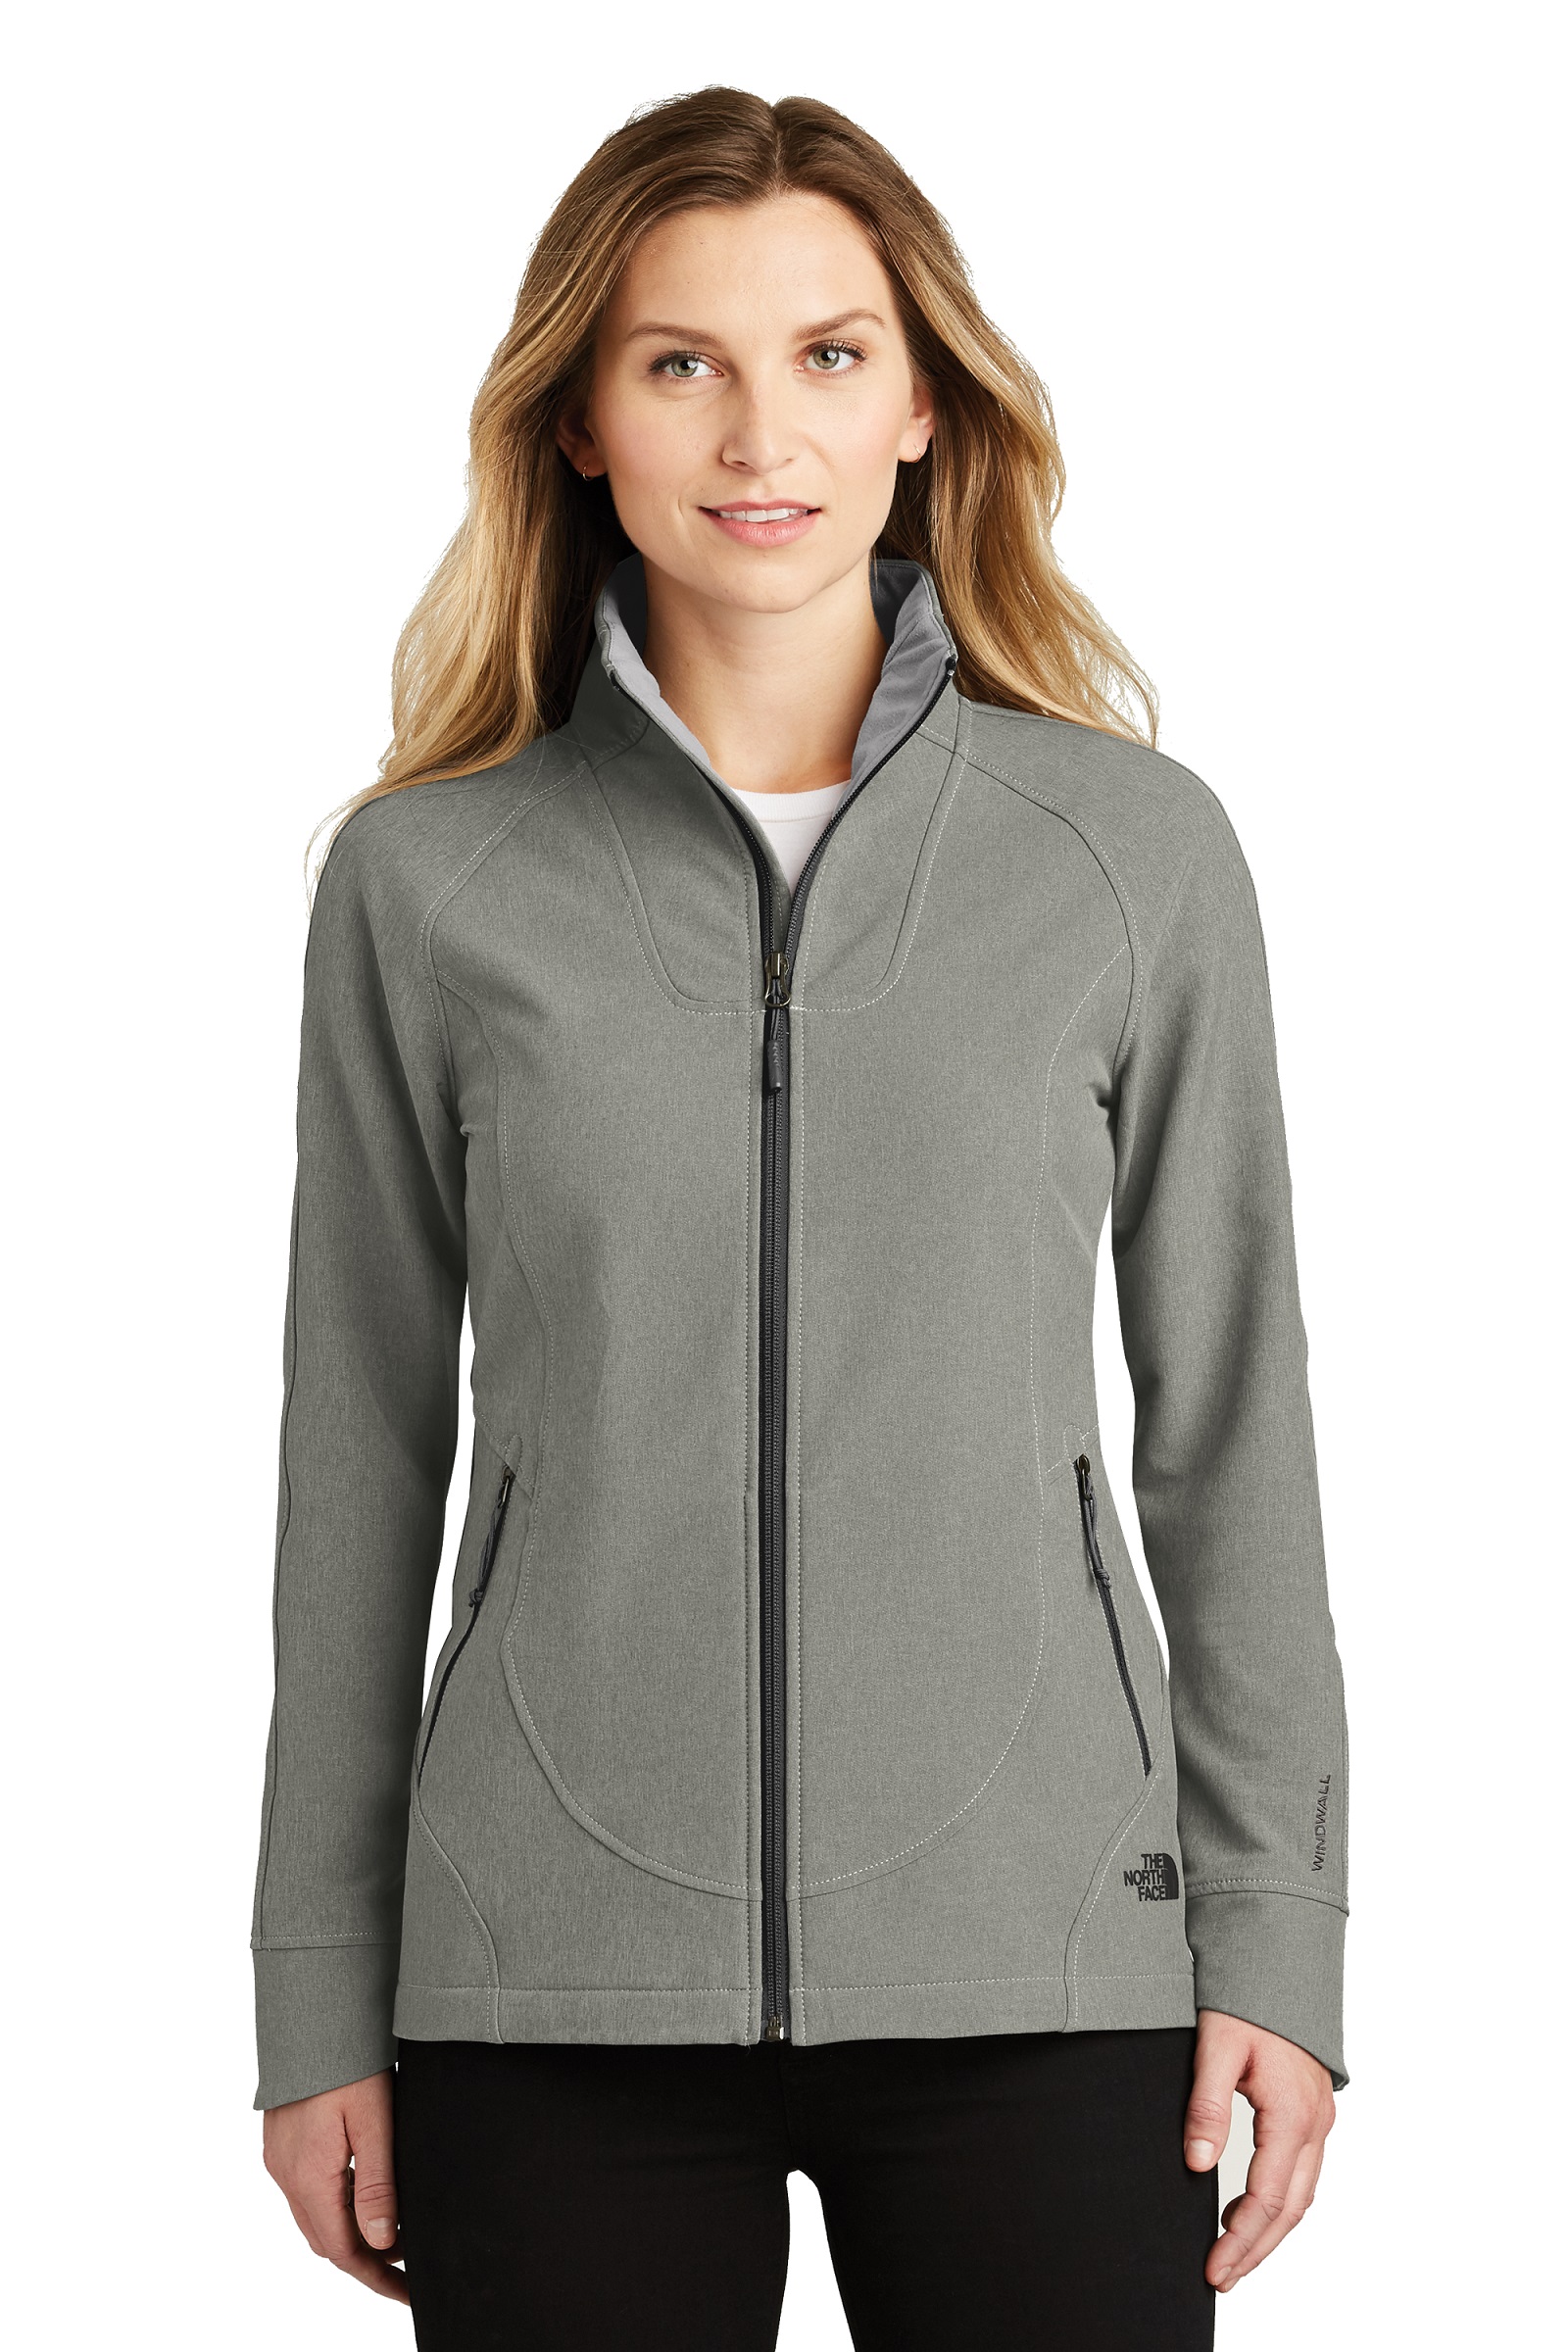 The North Face Women's Tech Stretch Soft Shell Jacket